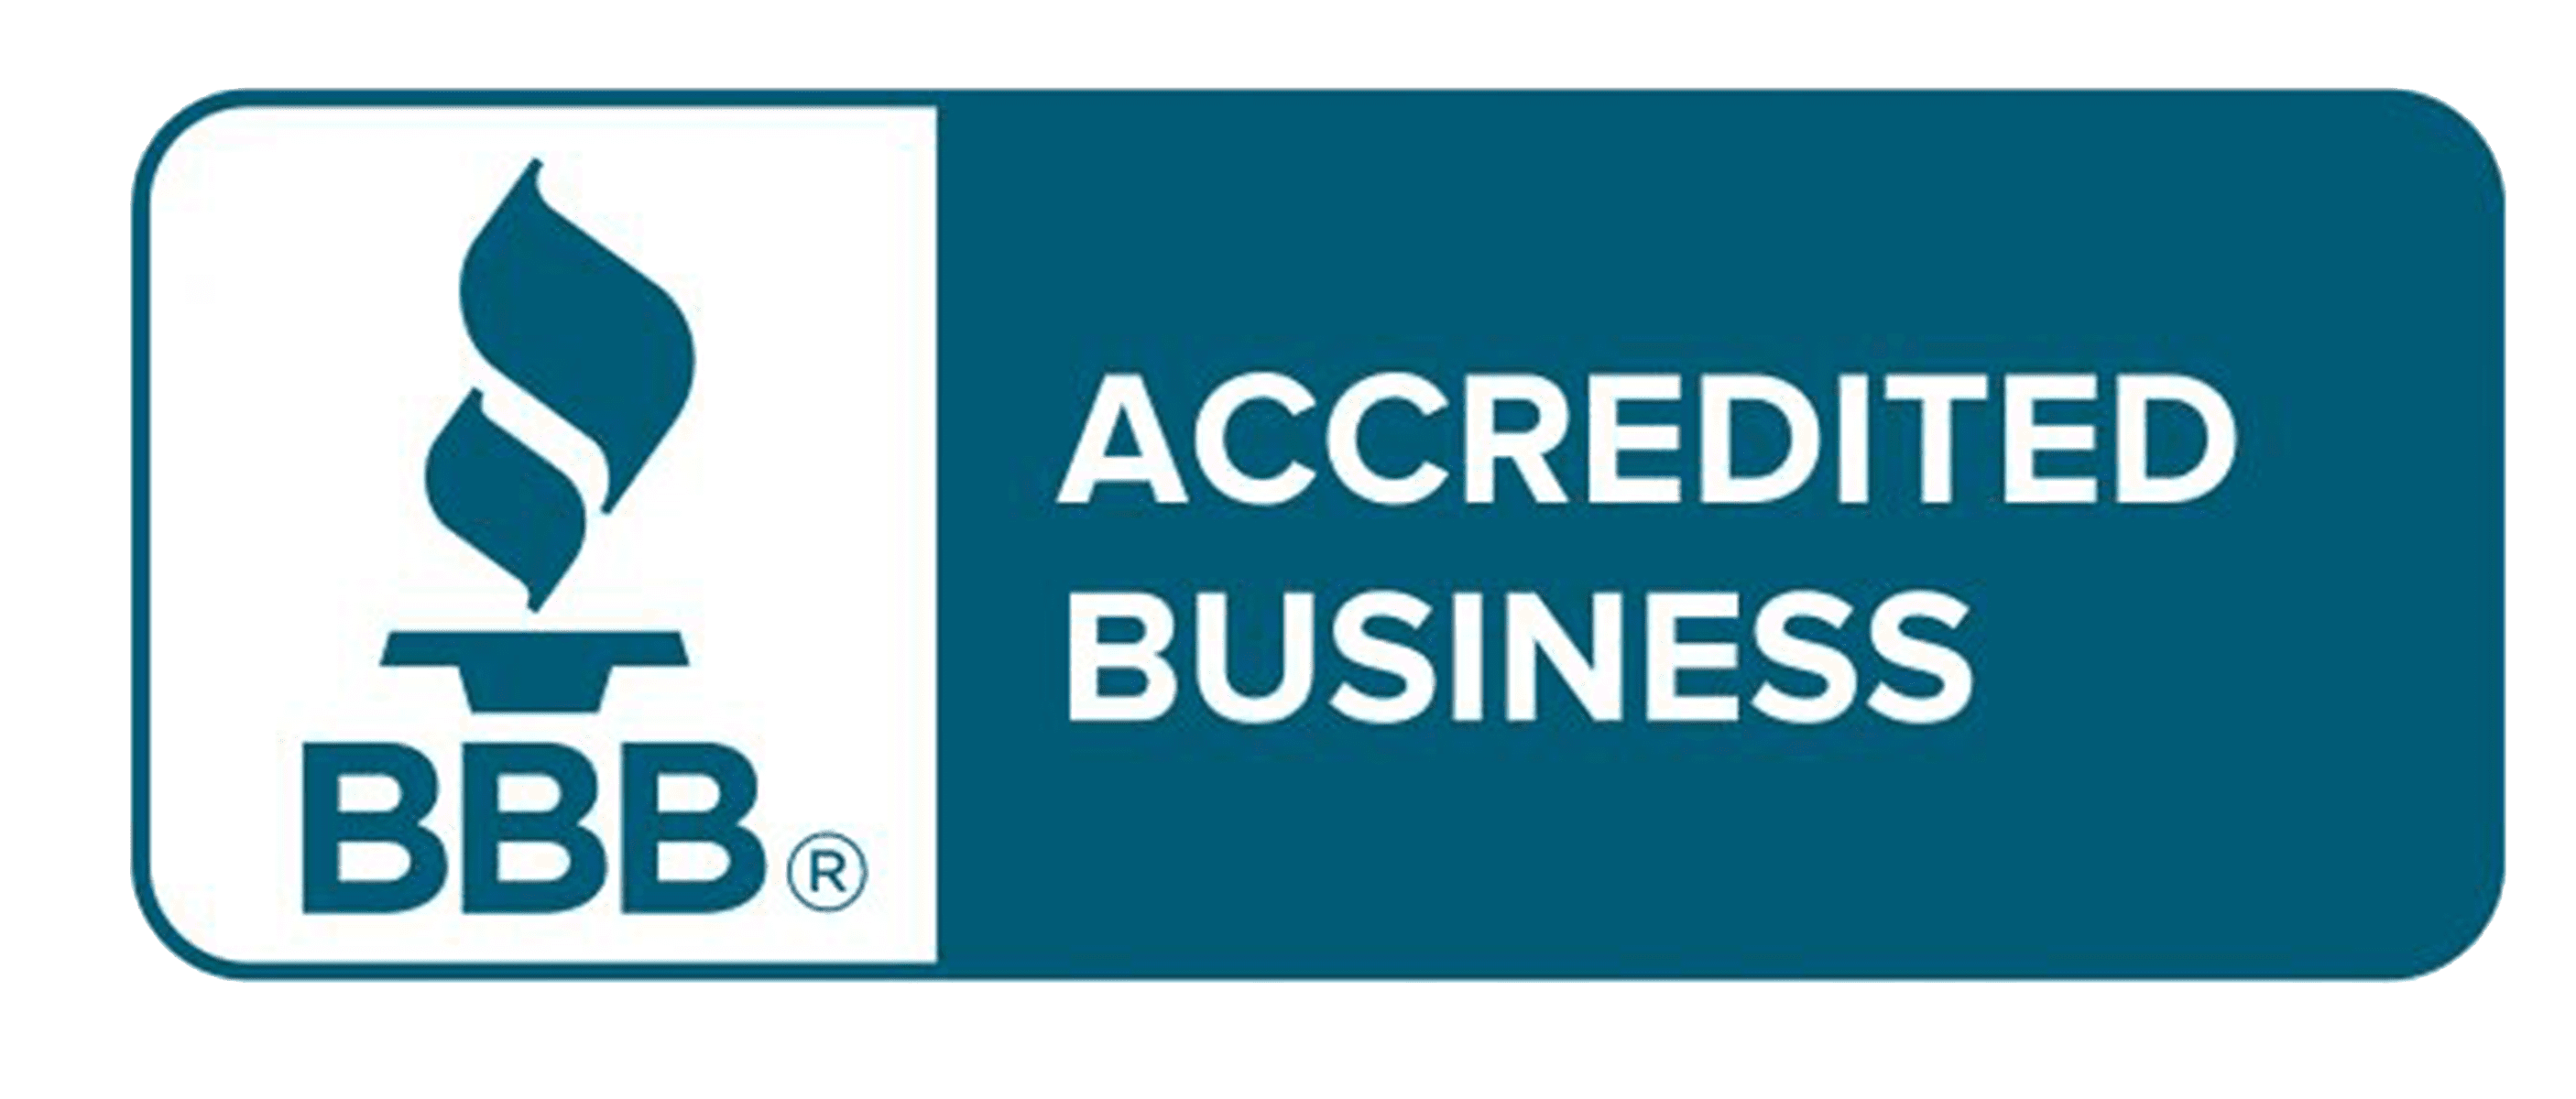 bbb-accredited-business5930